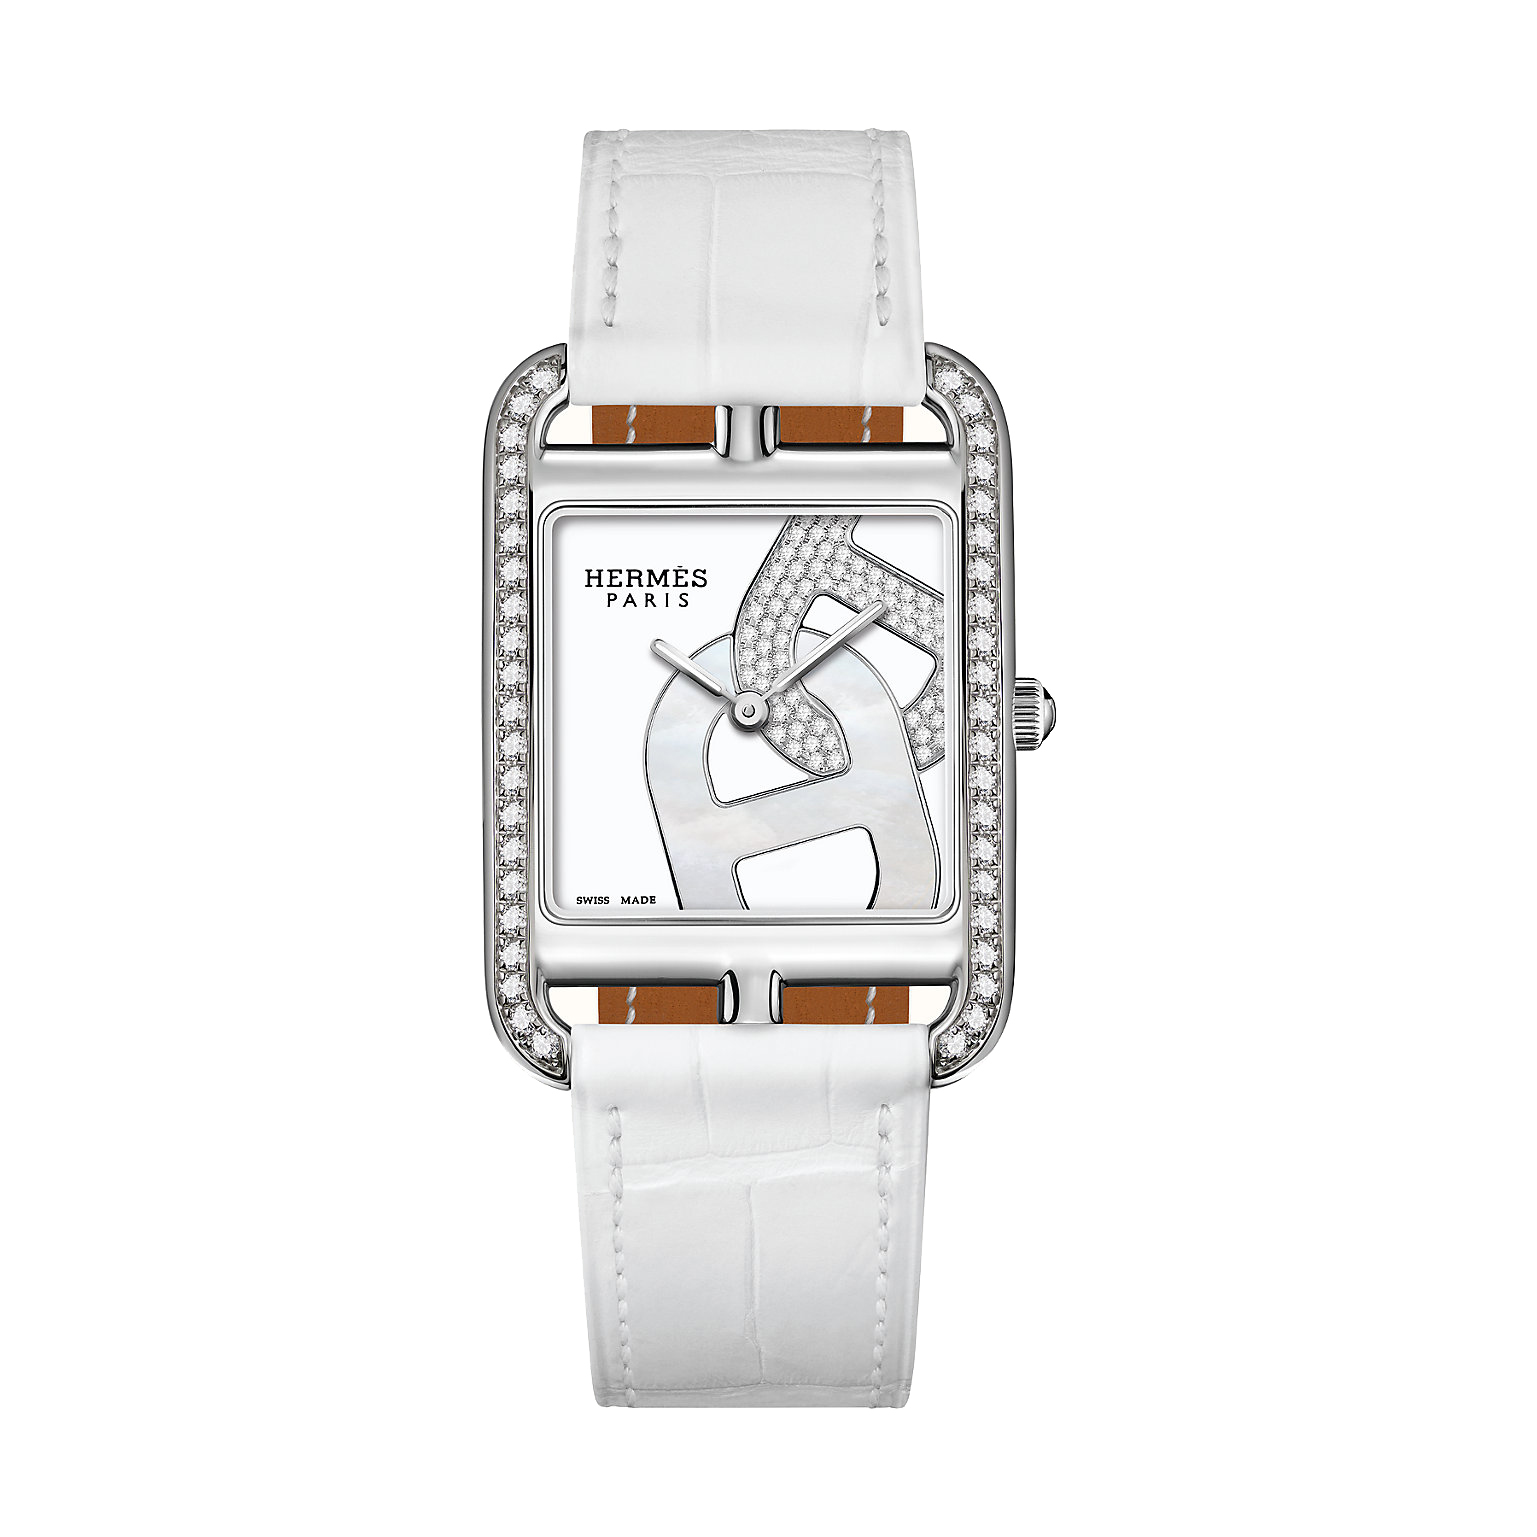 Hermès-cape-cod-chaine-d-ancre-joaillier-29-x-29mm-Hall-of-Time-047234WW00